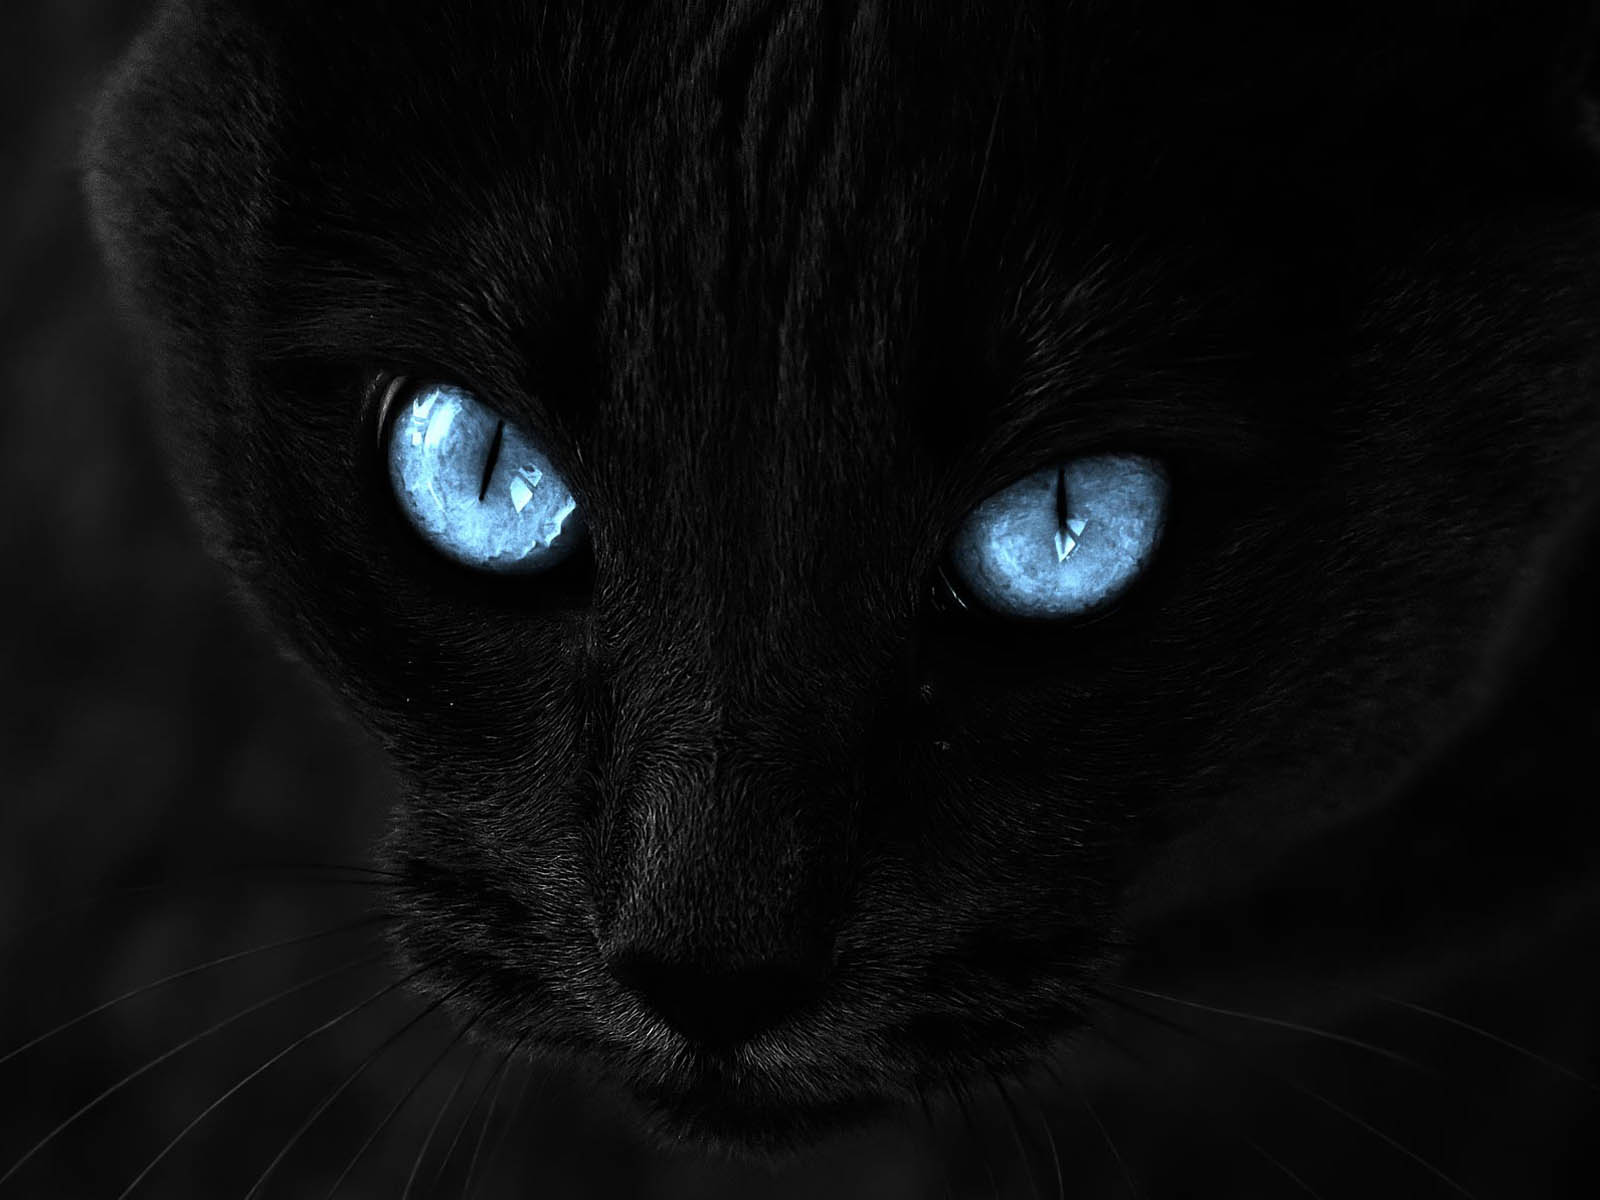 Black Cat with Blue Eyes